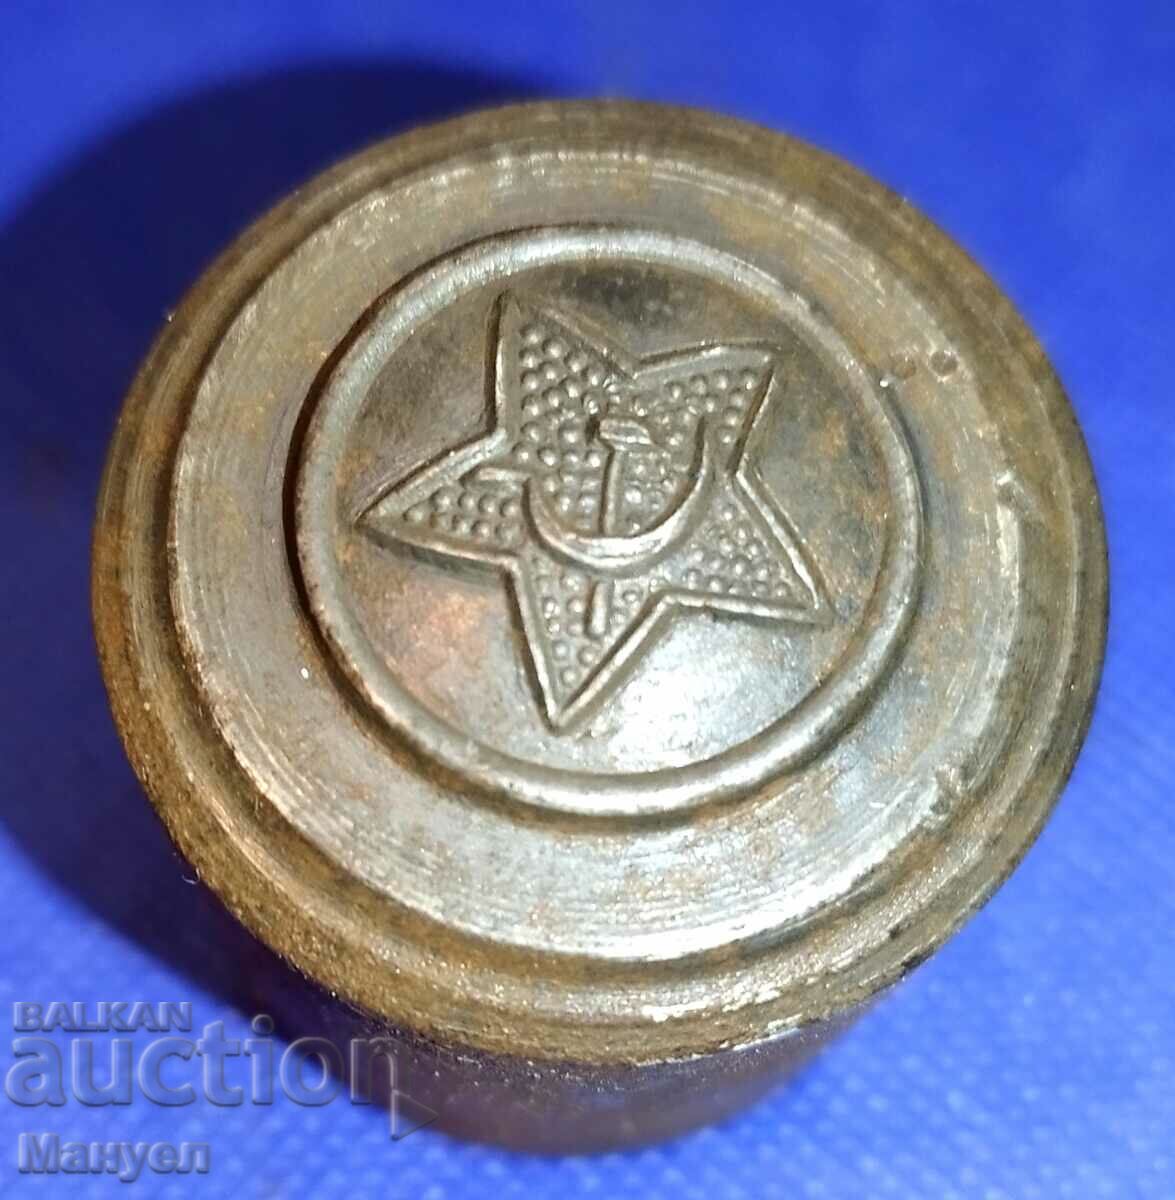 Old military button die.